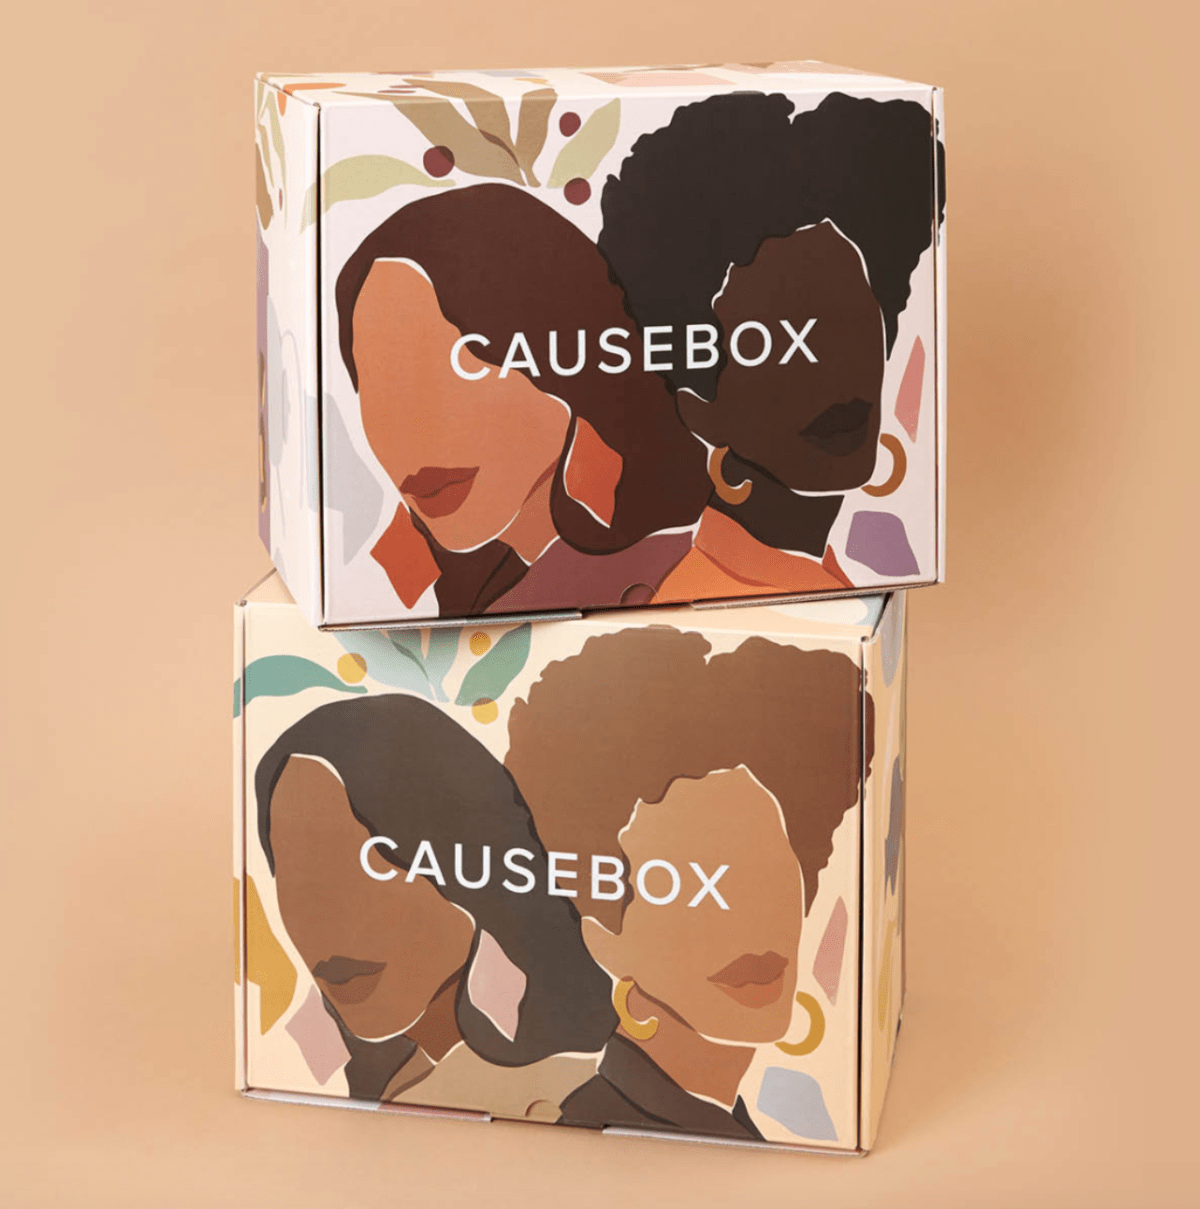 CAUSEBOX Cyber Monday Sale – Get Your First Box for $29.95 or First Box FREE with Annual Subscription.